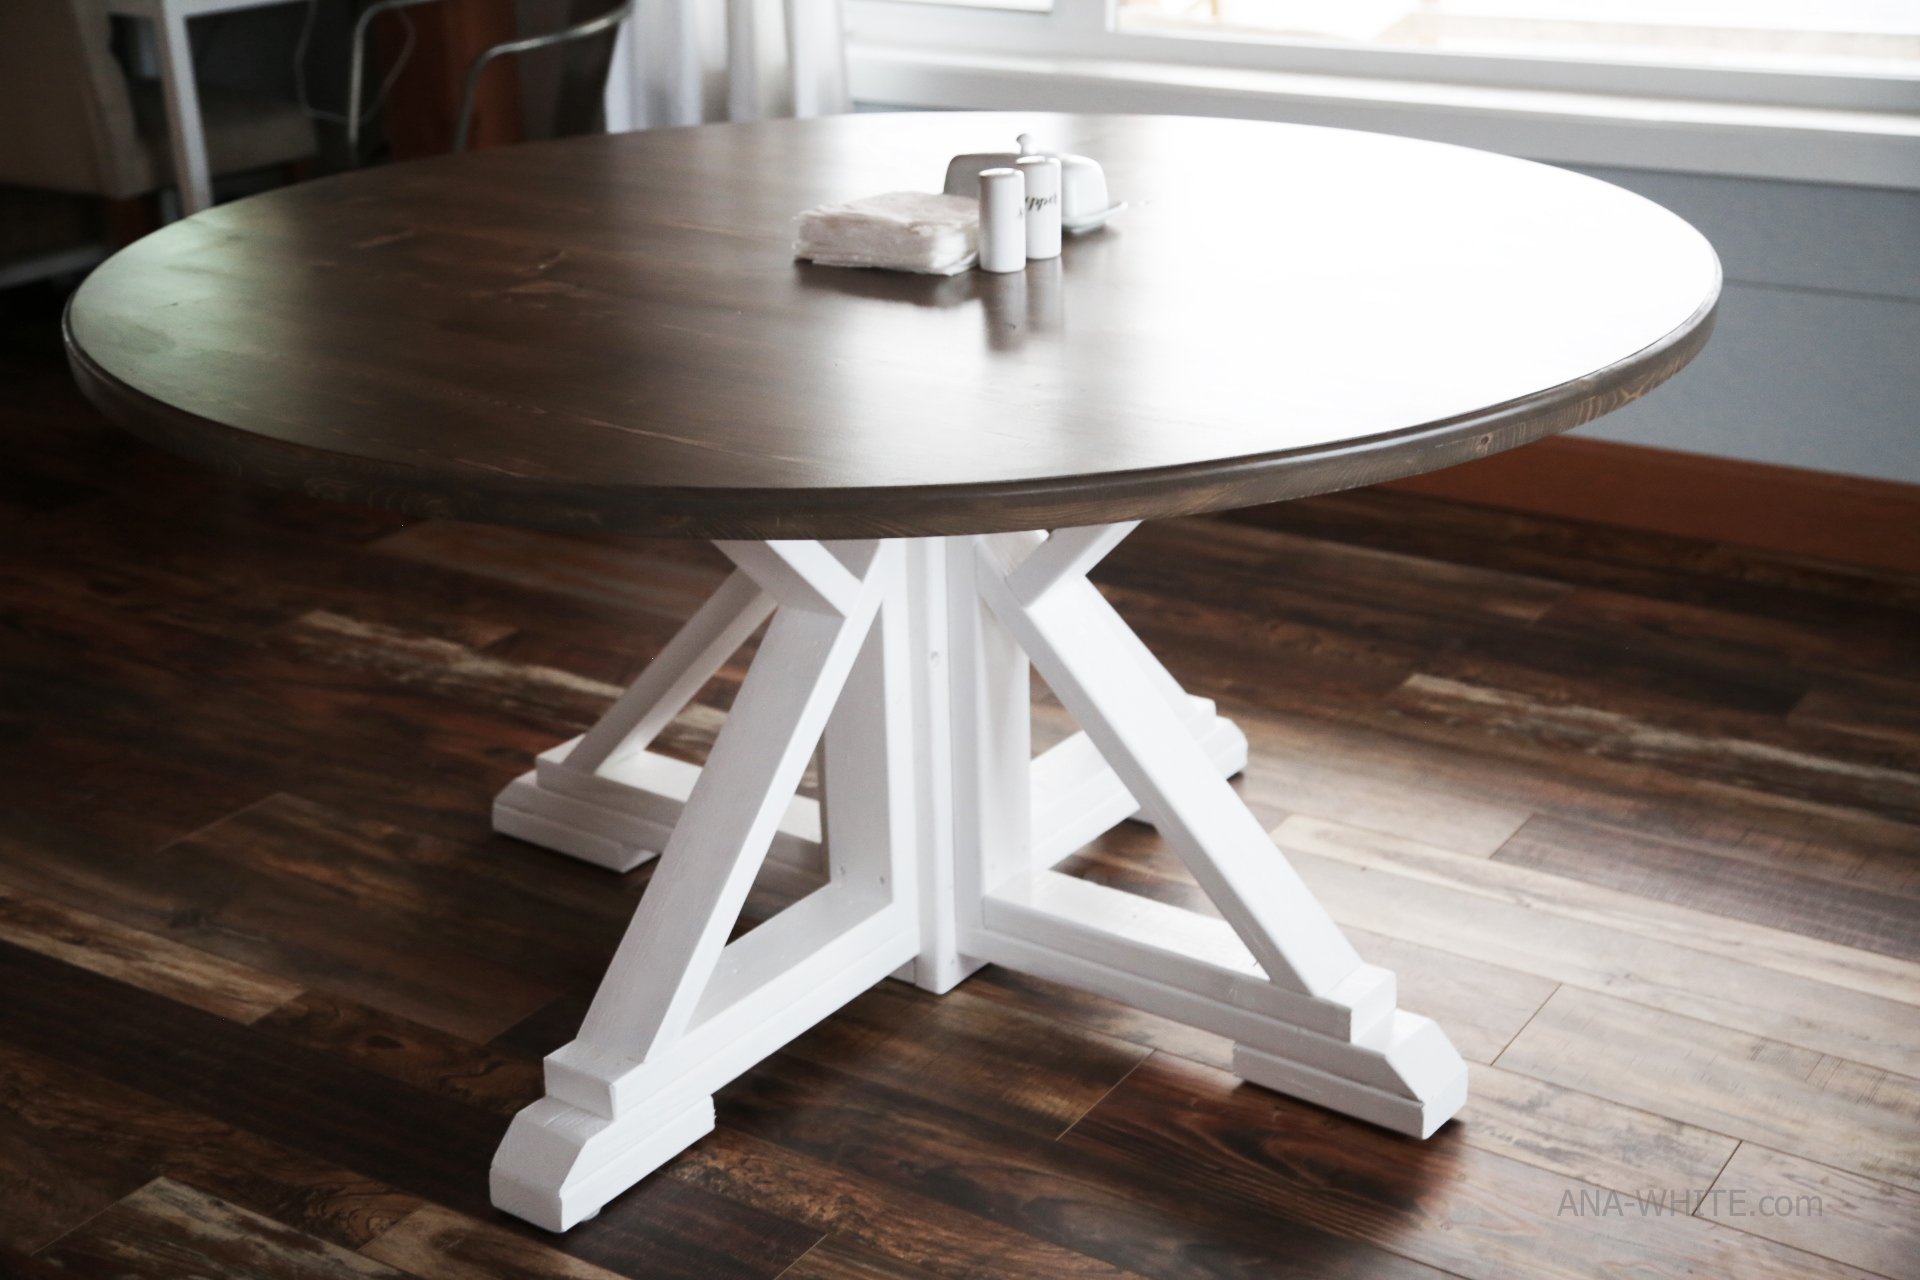 Round Modern Dining Table Base Ana White, How To Make A Round Table Base